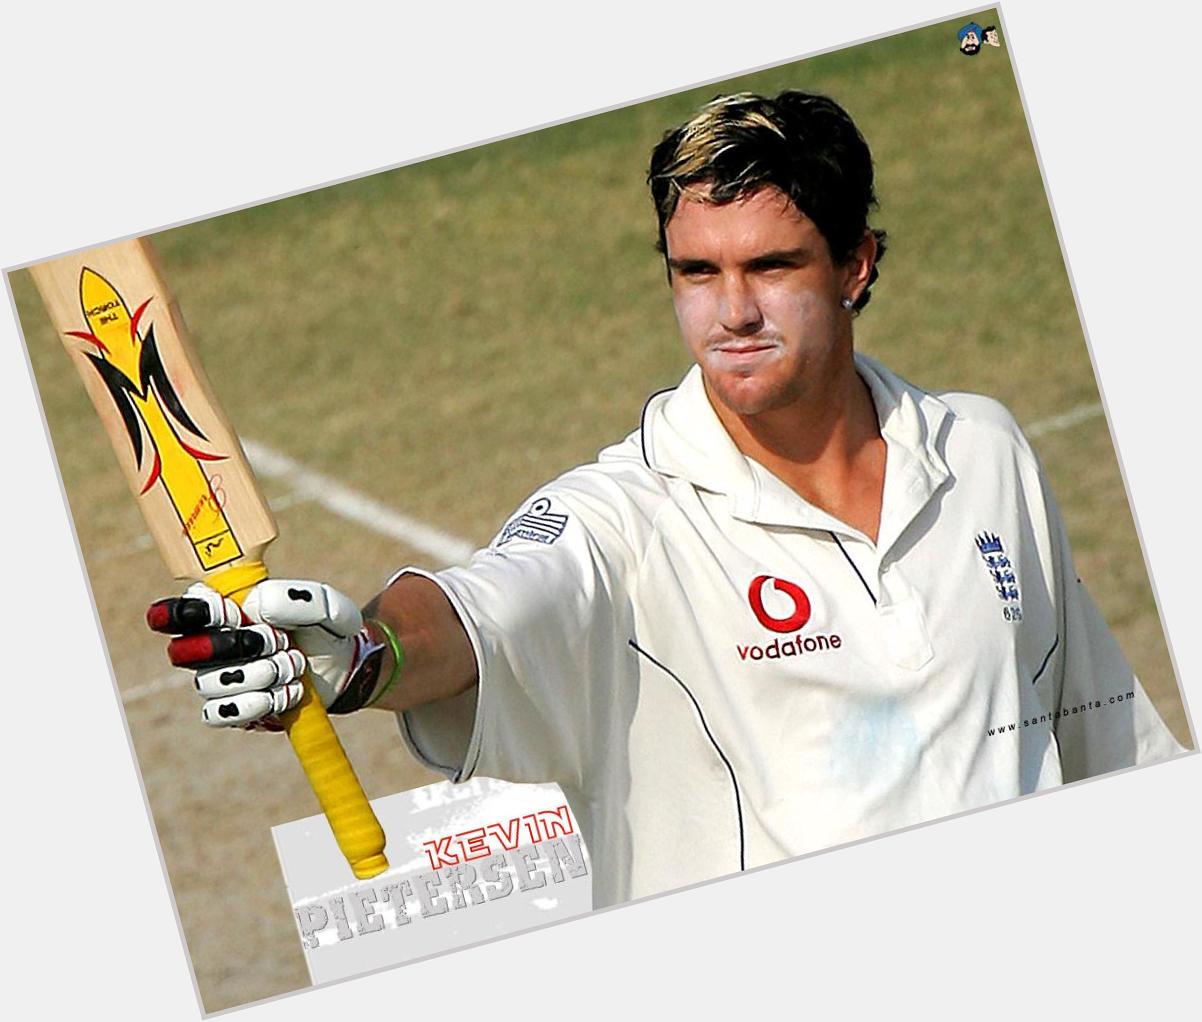 Happy birthday to former England cricket captain Kevin Pietersen MBE - 35 years young today 